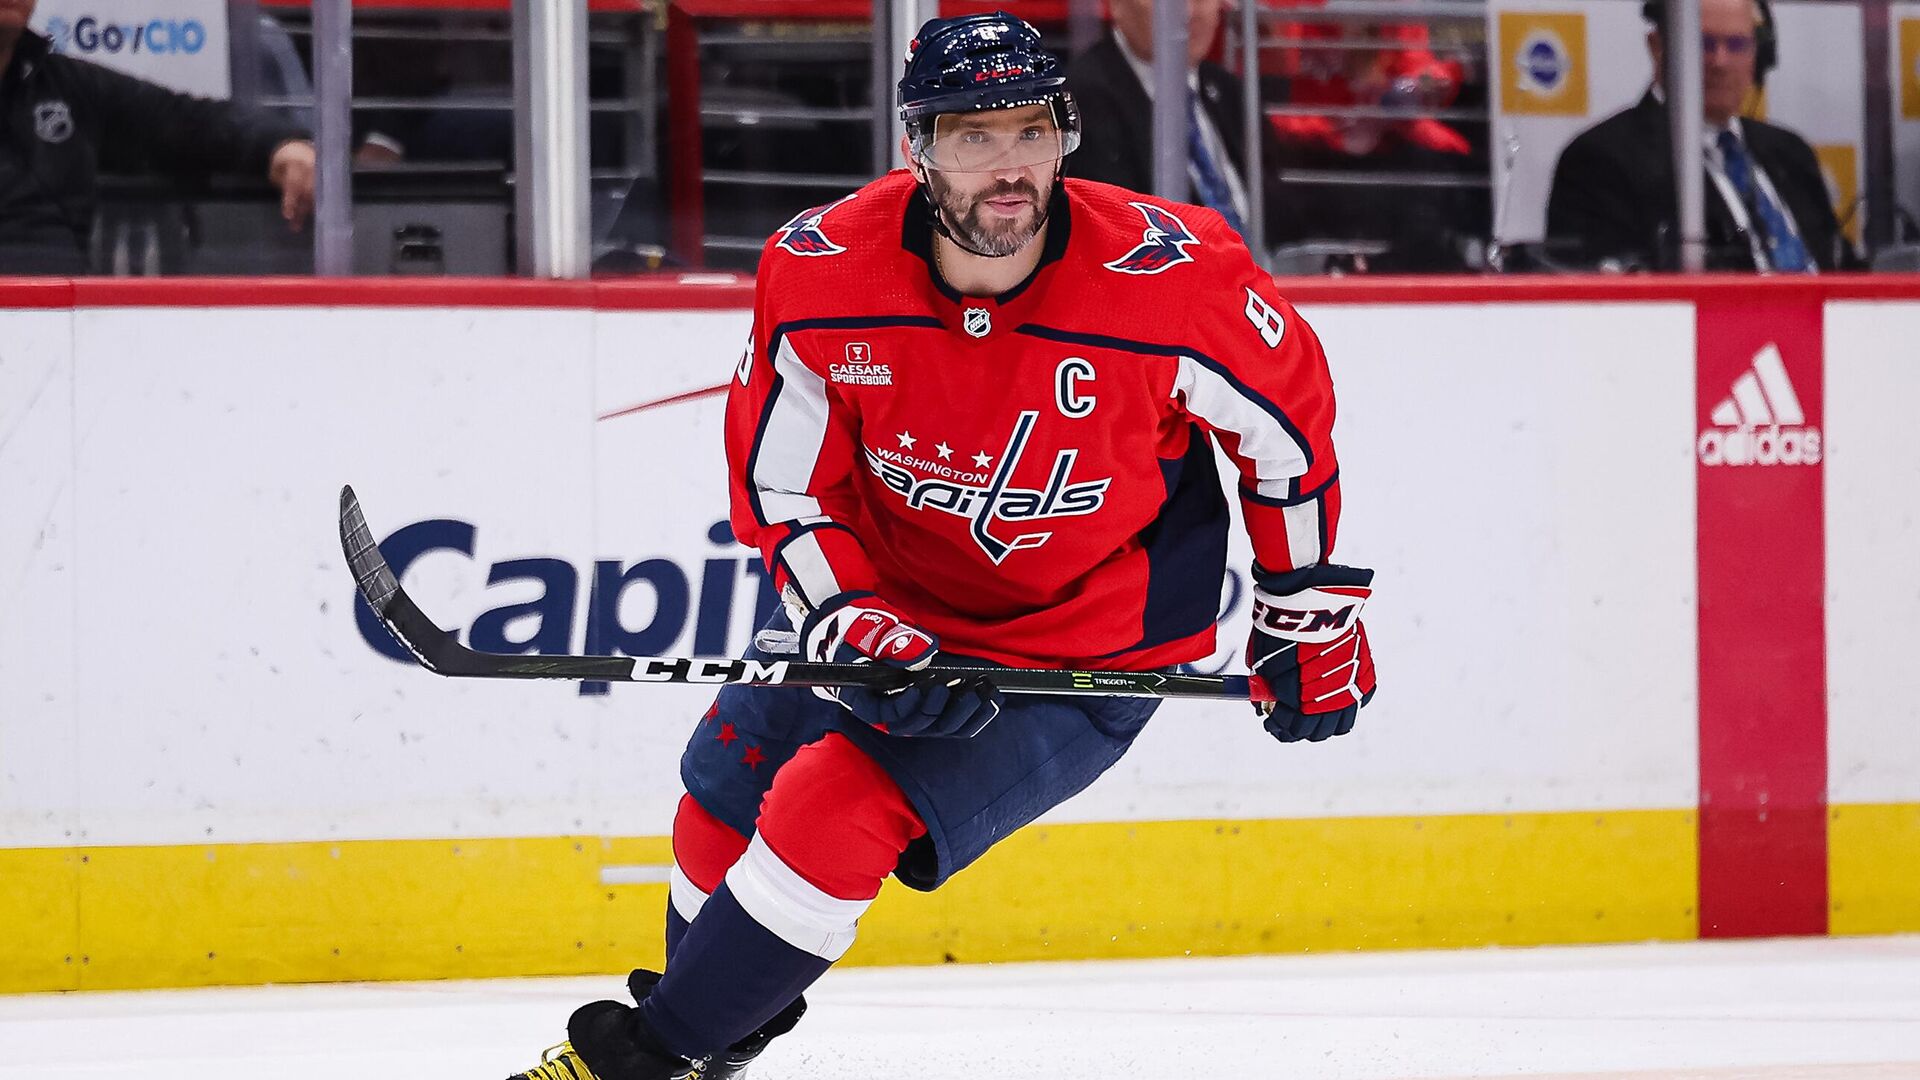 “Washington” lost to the worst club in the NHL, Ovechkin scored a record goal